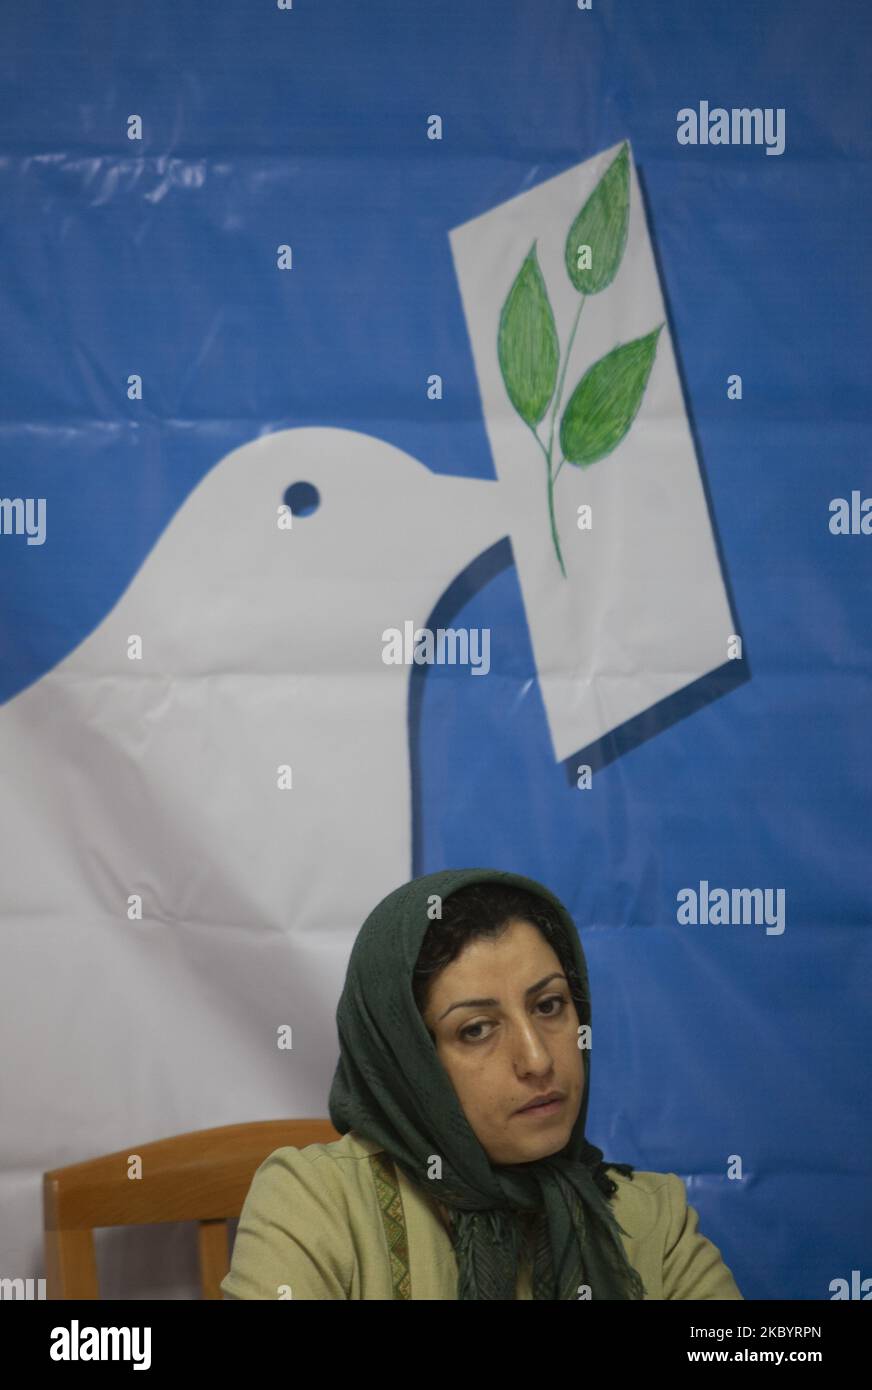 Iranian female human rights activist, Narges Mohammadi, looks on while attending a session in the former office of the Defenders of Human Rights Association in central Tehran, Iran on November 19, 2007. The group of 16 experts expressed grave concerns that Ms. Mohammadi appears to have contracted COVID-19 in Zanjan Prison. Ms. Mohammadi has been in detention since 2015 on charges that stem from her human rights work. She received a combined 16-year prison sentence in May 2016, of which she will need to serve 10 years under Iranian law, According to the office of the High Commissioners of the U Stock Photo